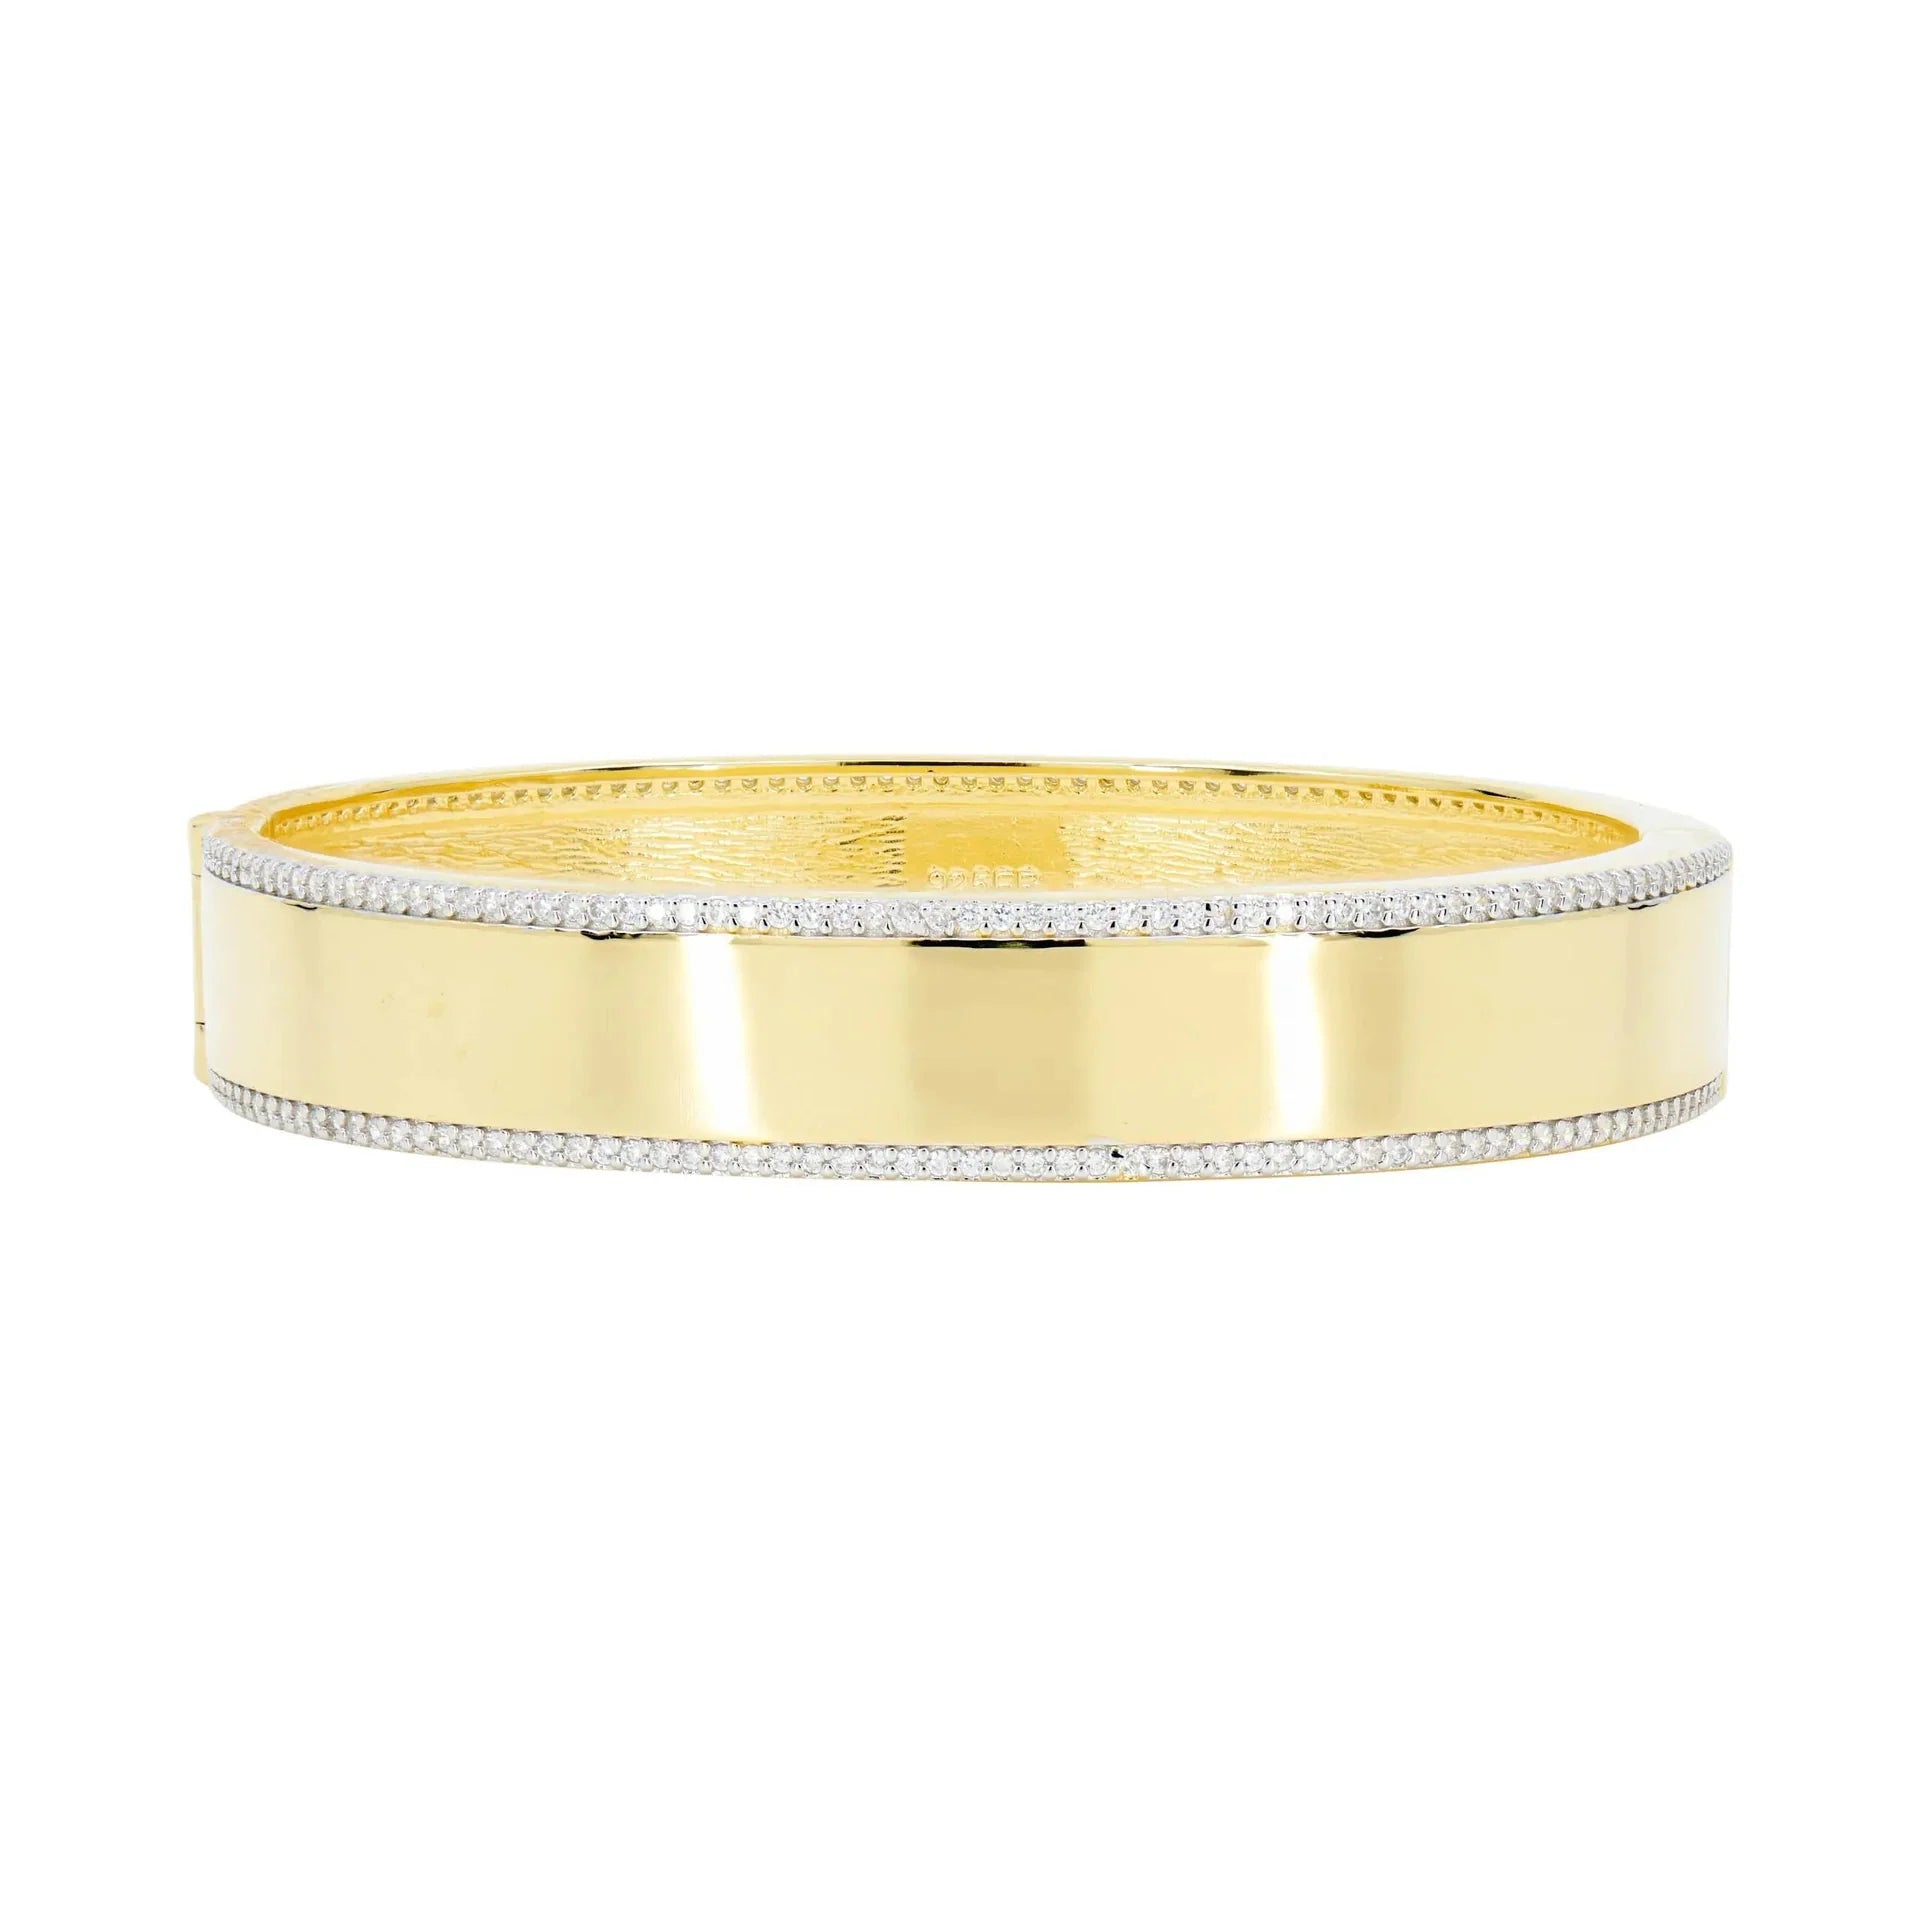 Reflections Bangle: Radiant Elegance in Sterling Silver